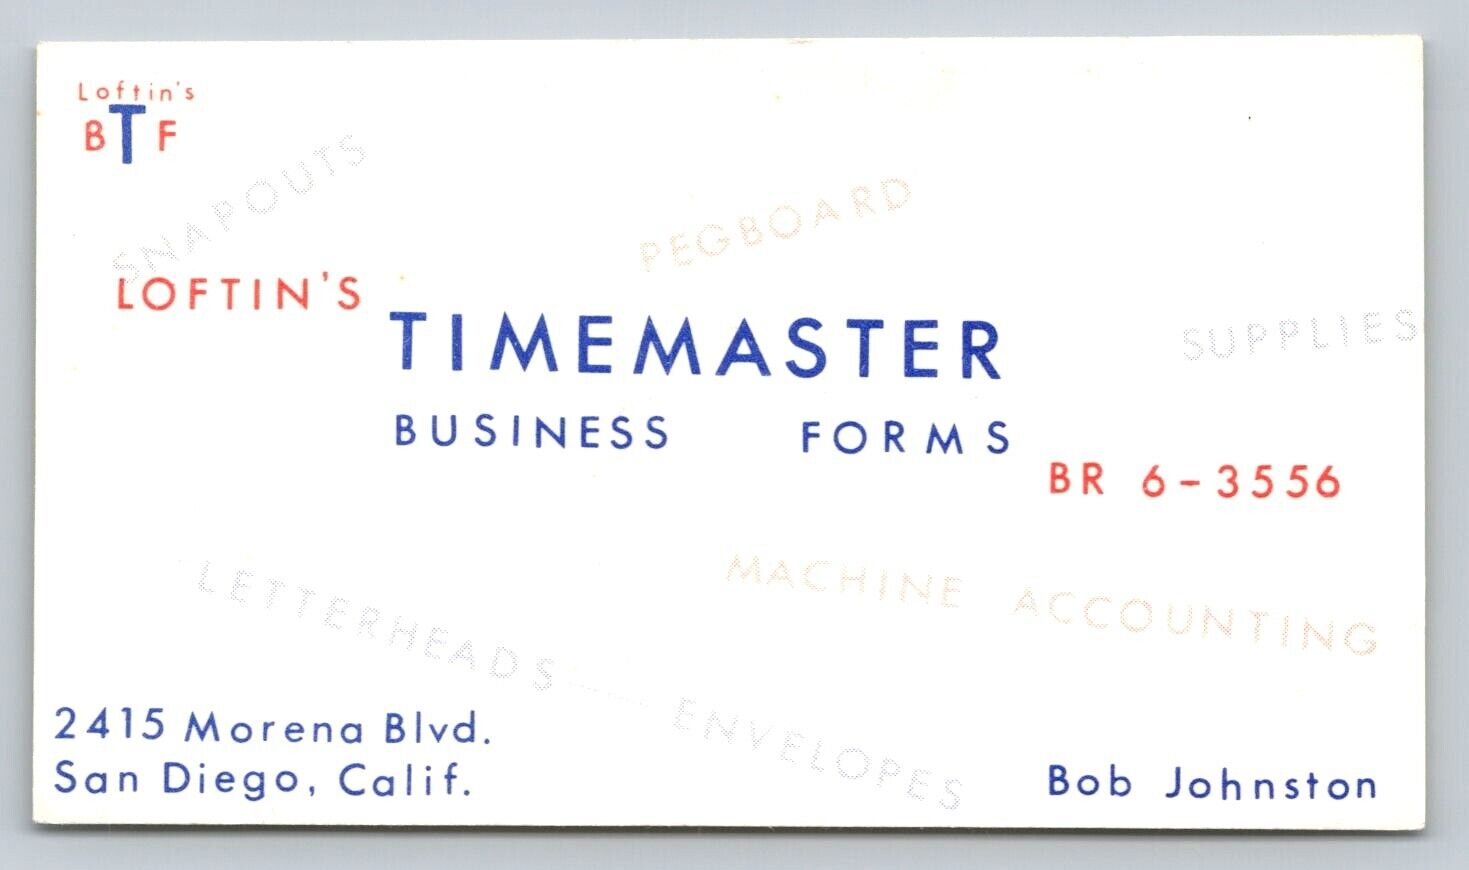 Vintage Business Card Timemaster Business Forms Loftin's Time Master San Diego 